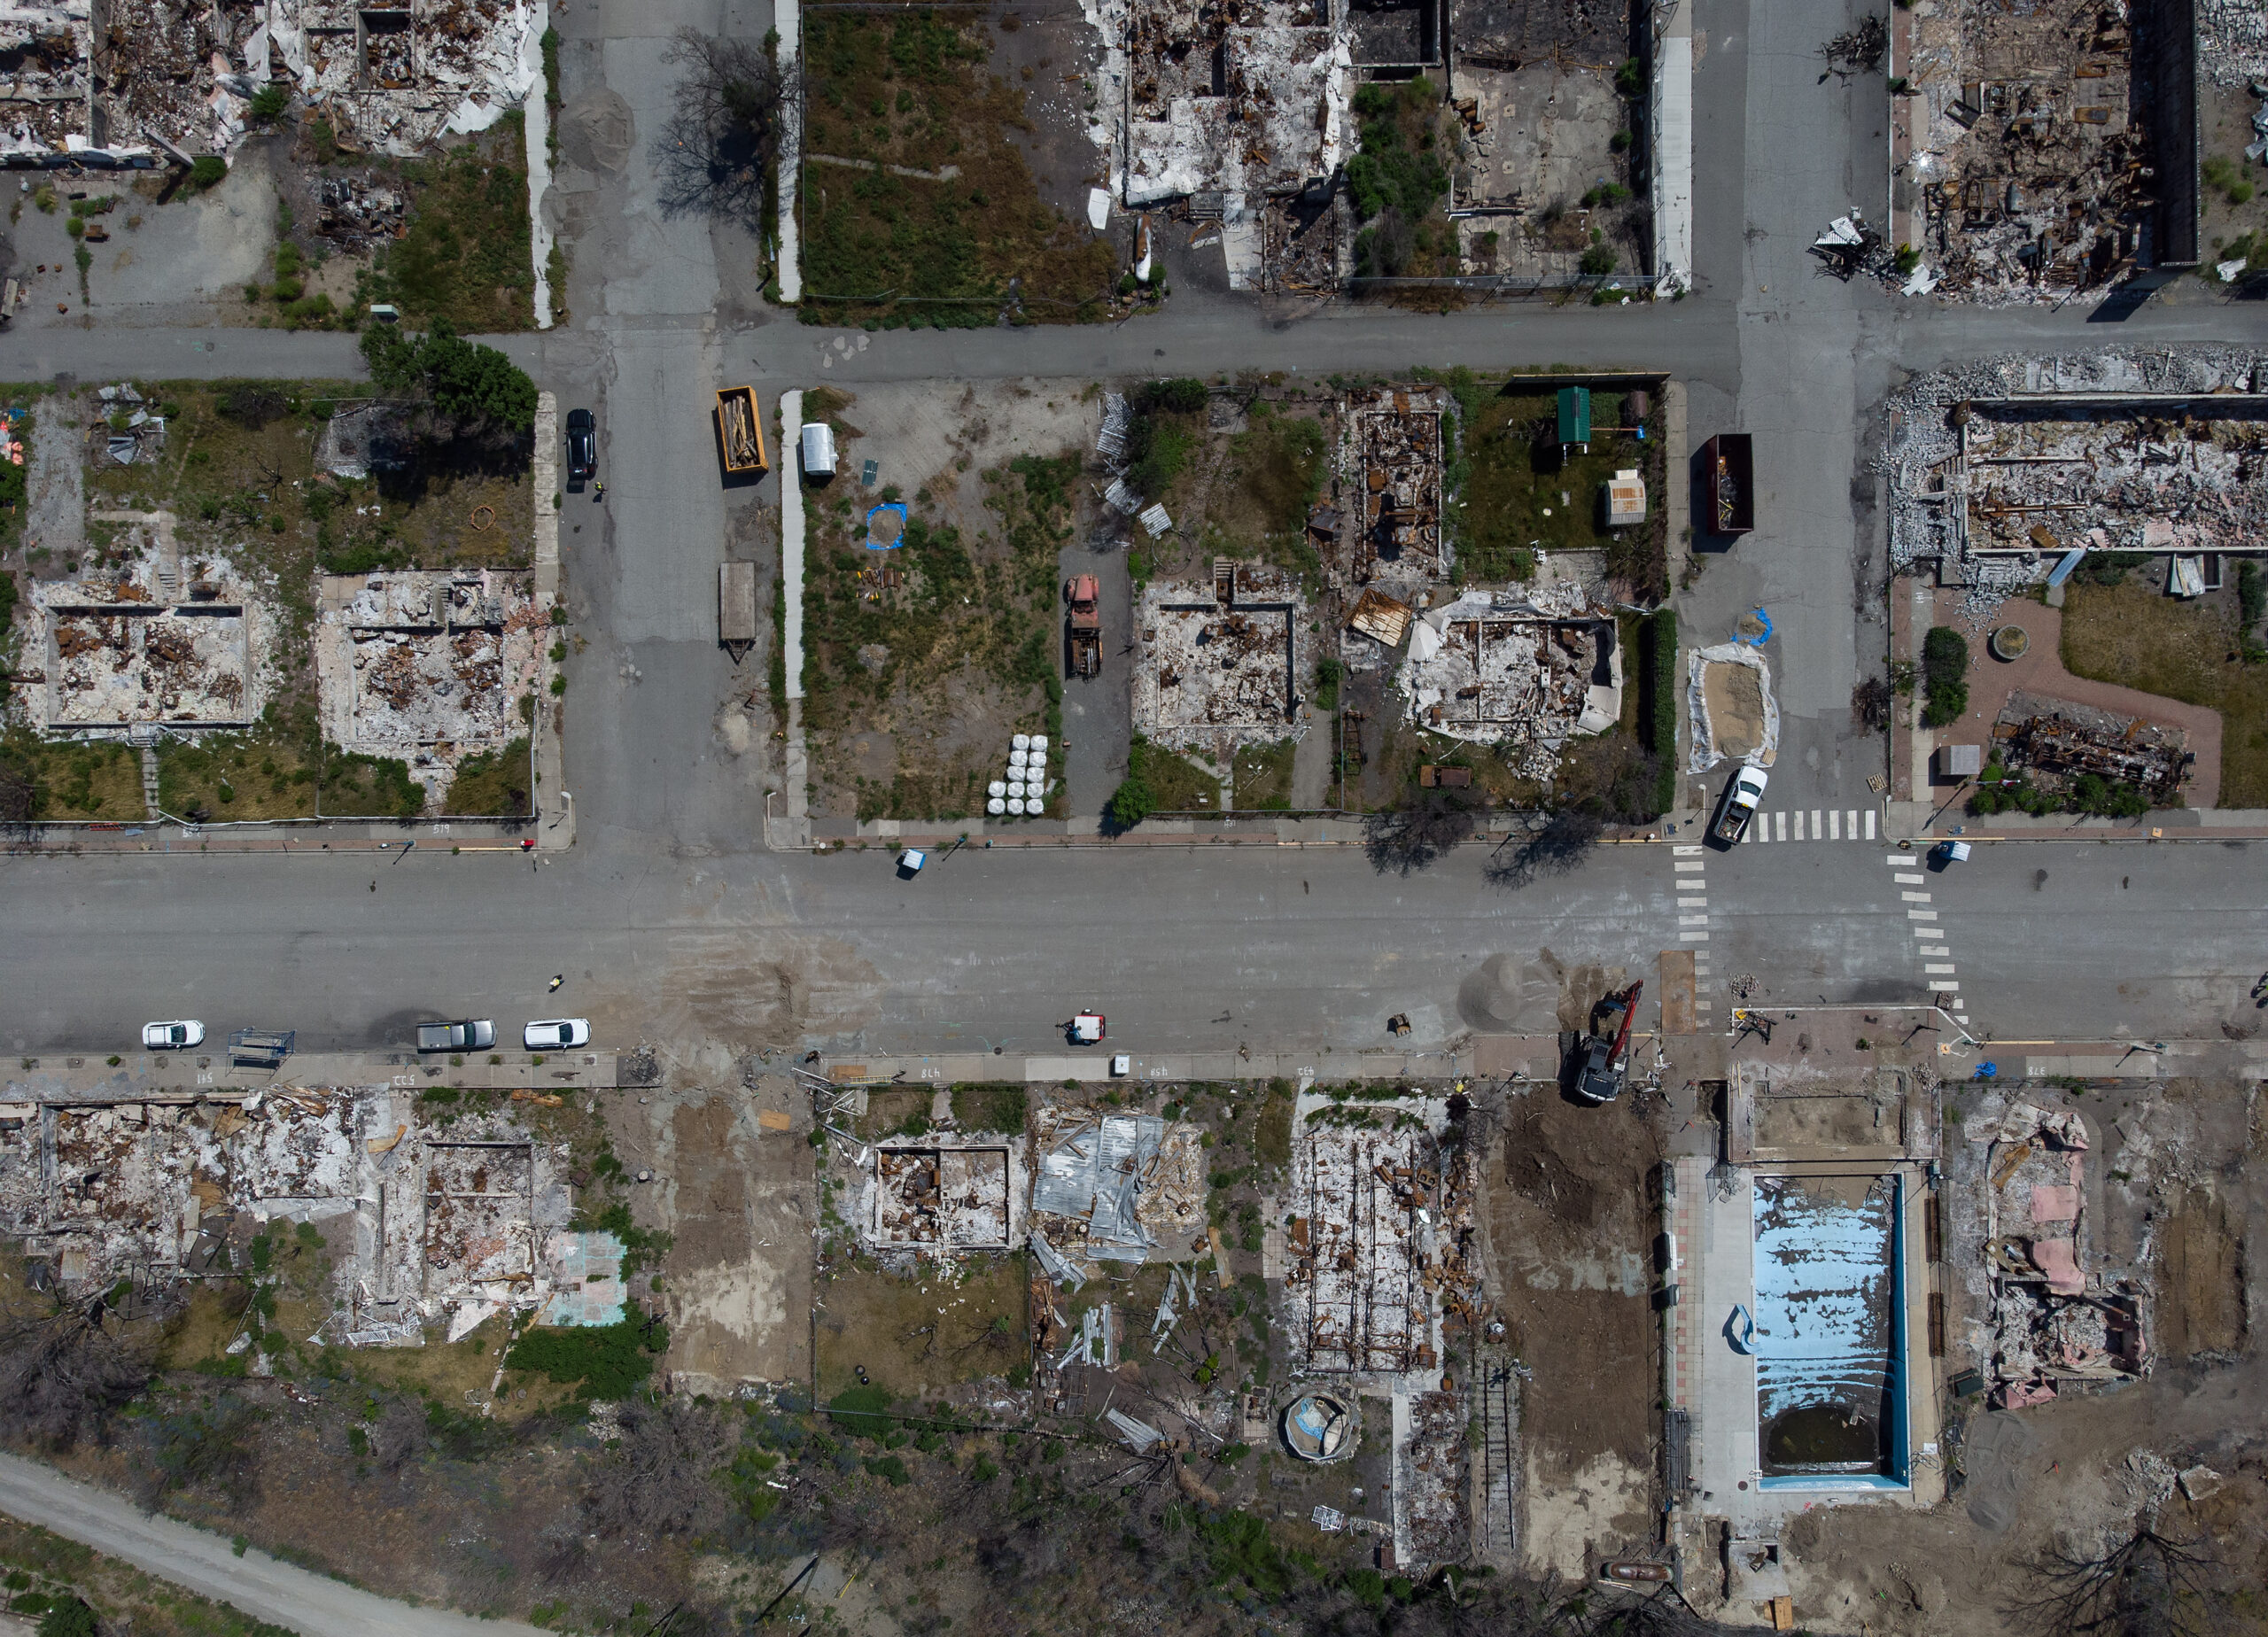 Charred and destroyed houses seen from overhead, with streets, and the remains of a pool can also be seen.